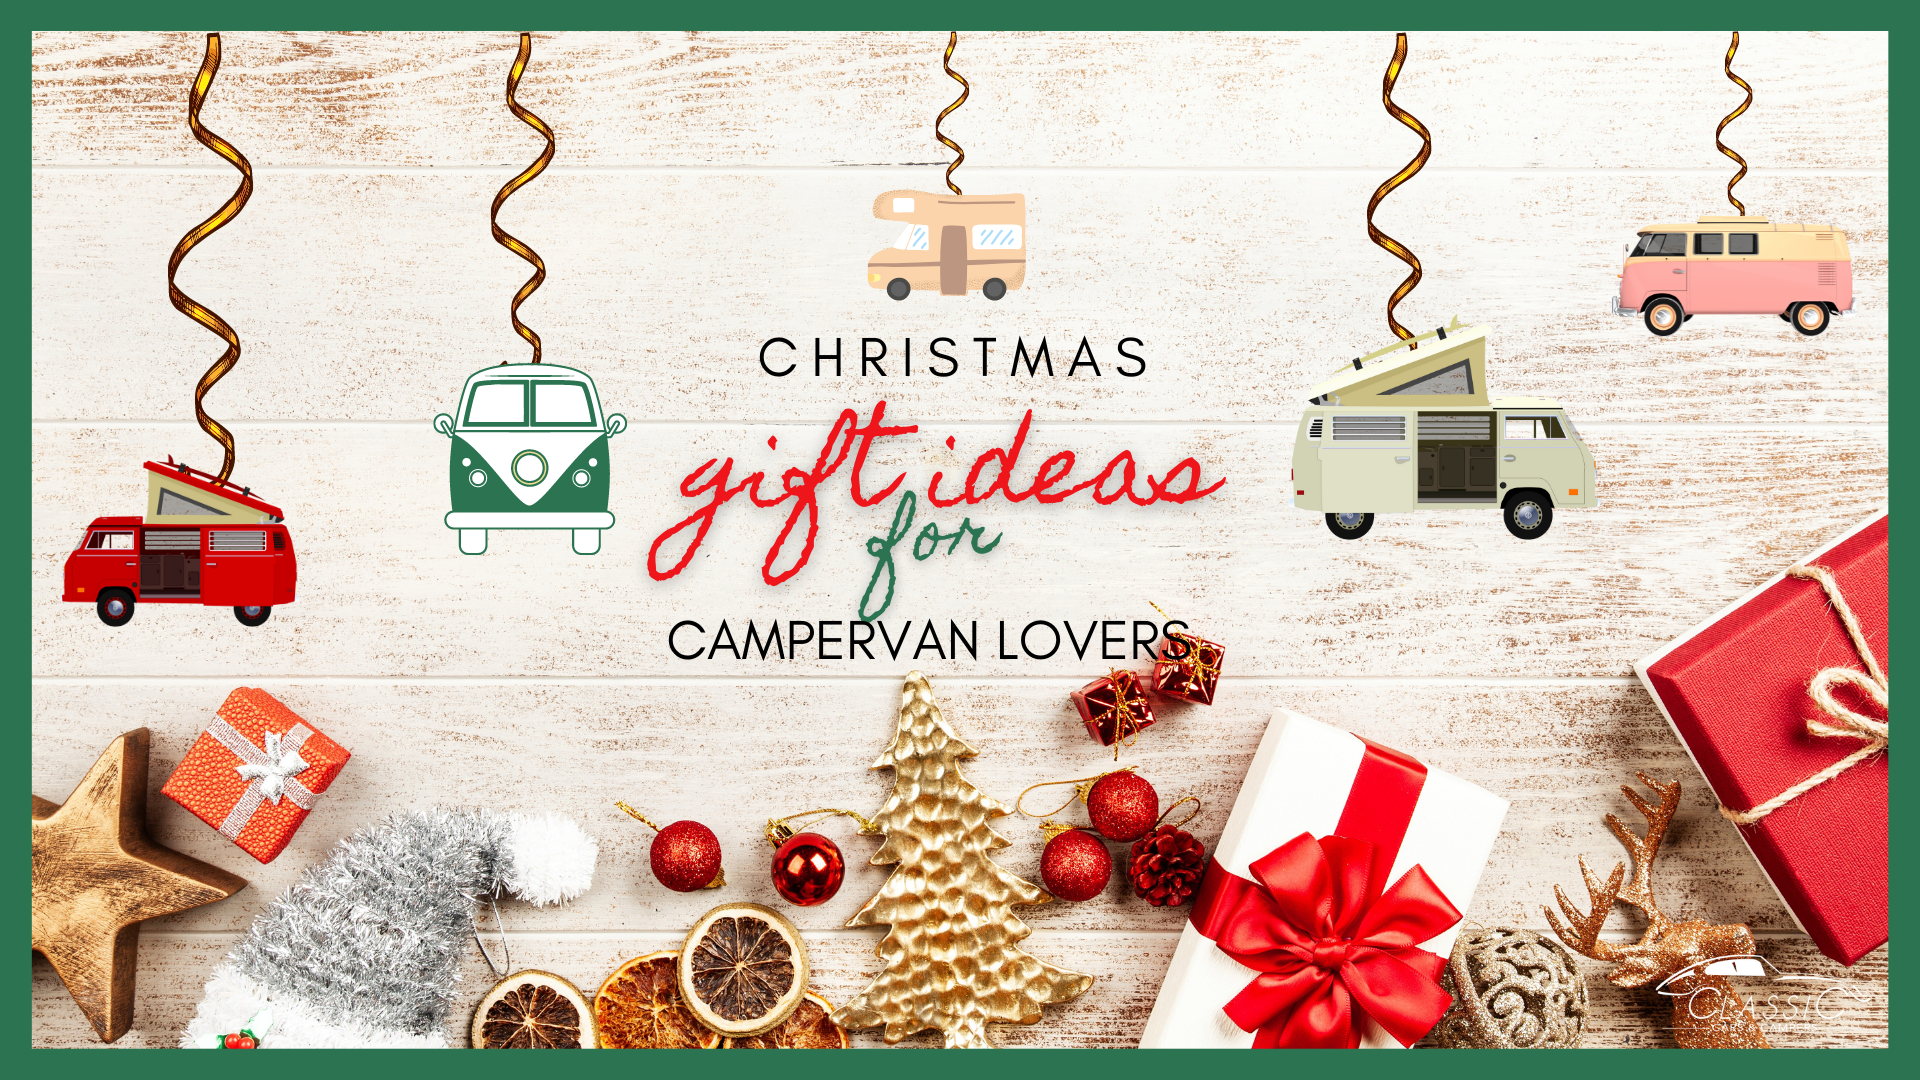 christmas gift ideas for campervan lovers